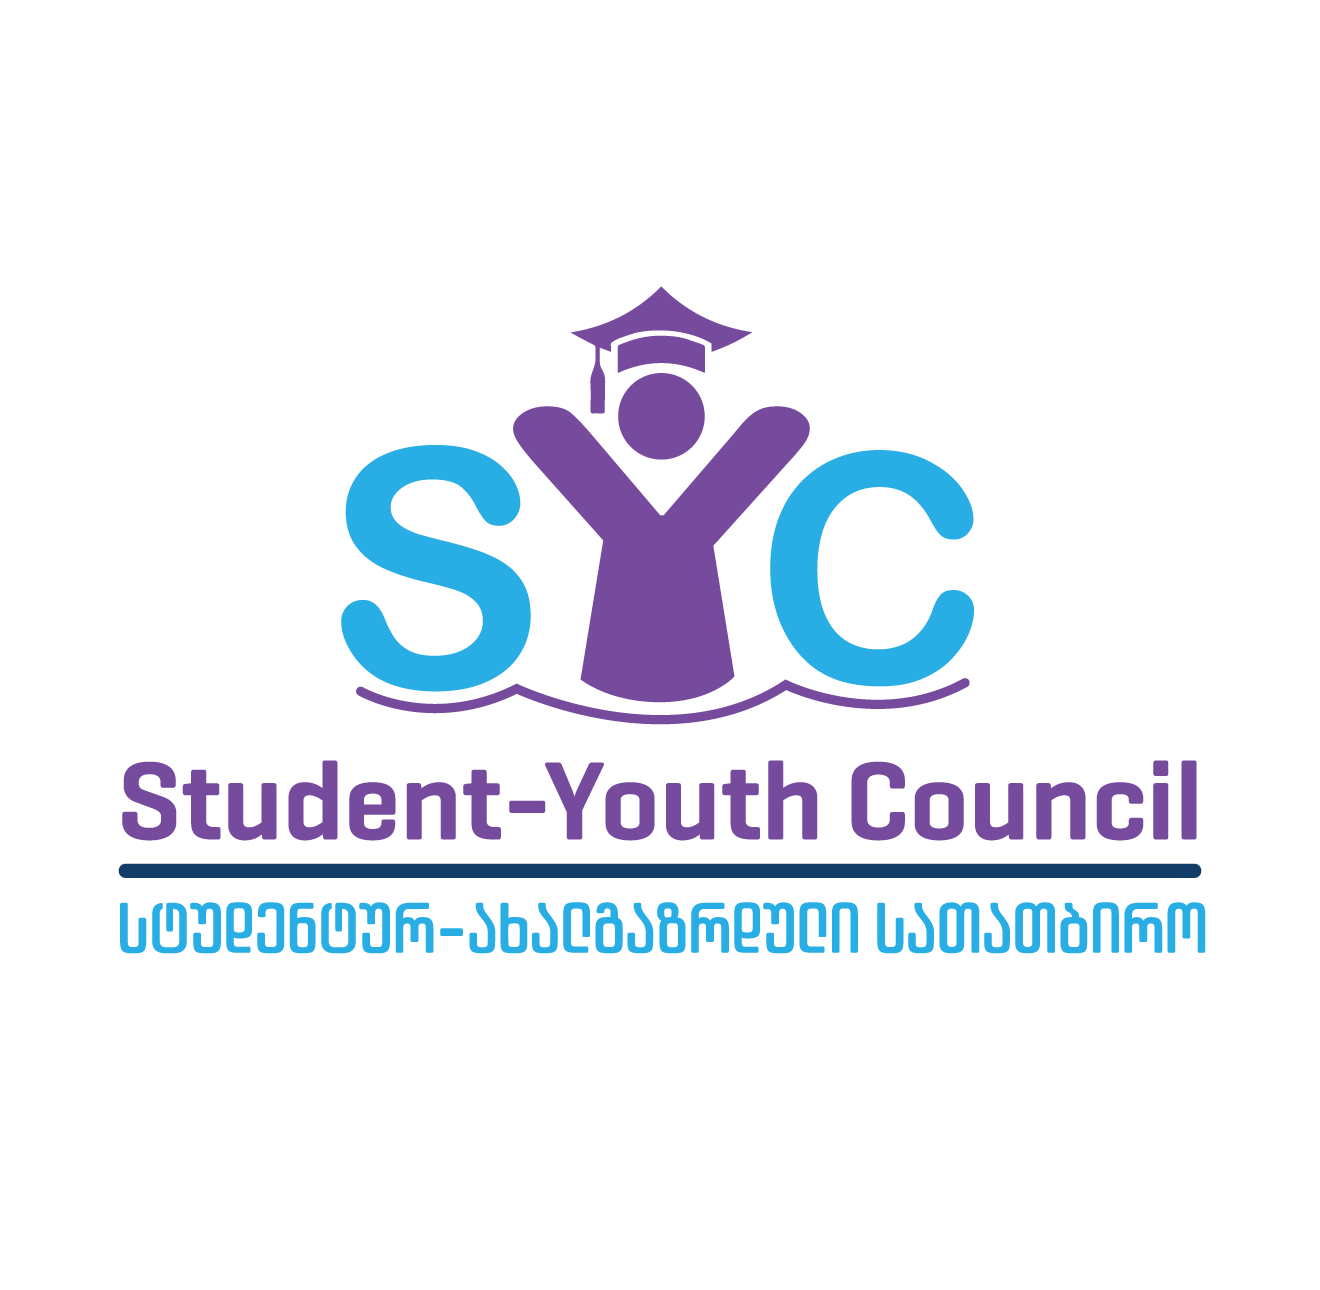 Student-Youth Council